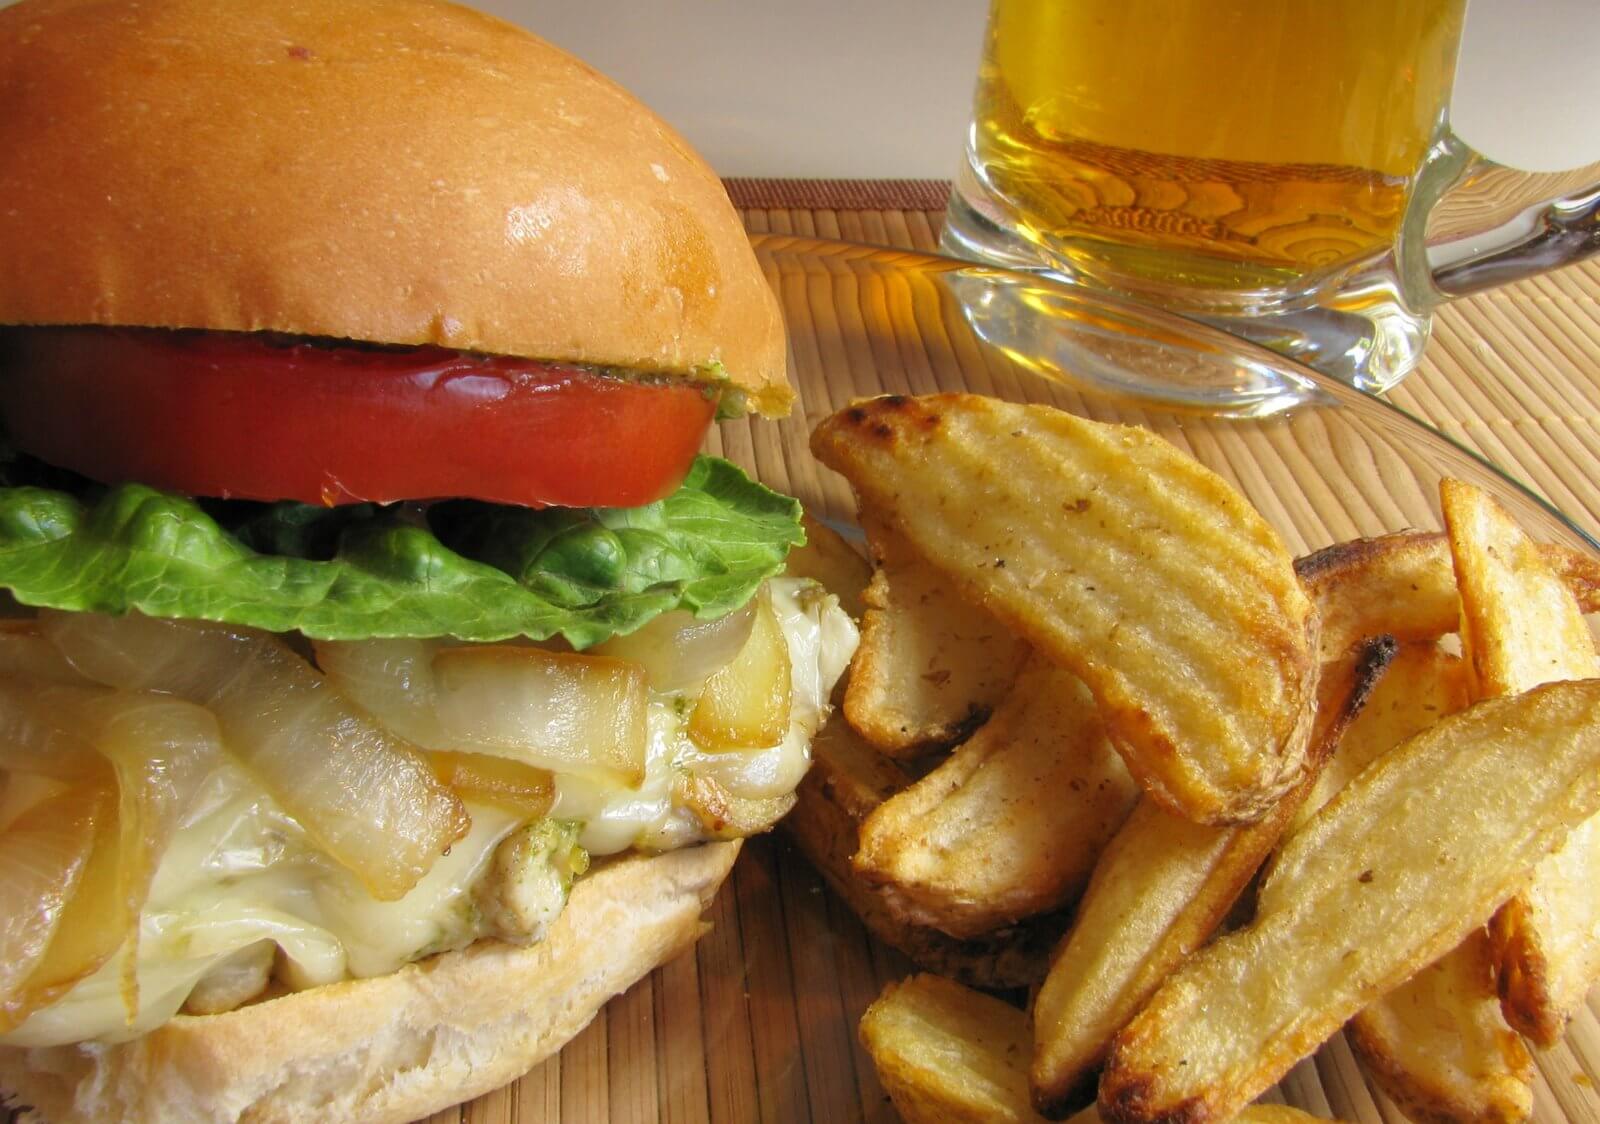 Pesto Chicken Sandwich with Caramelized Onions and Havarti